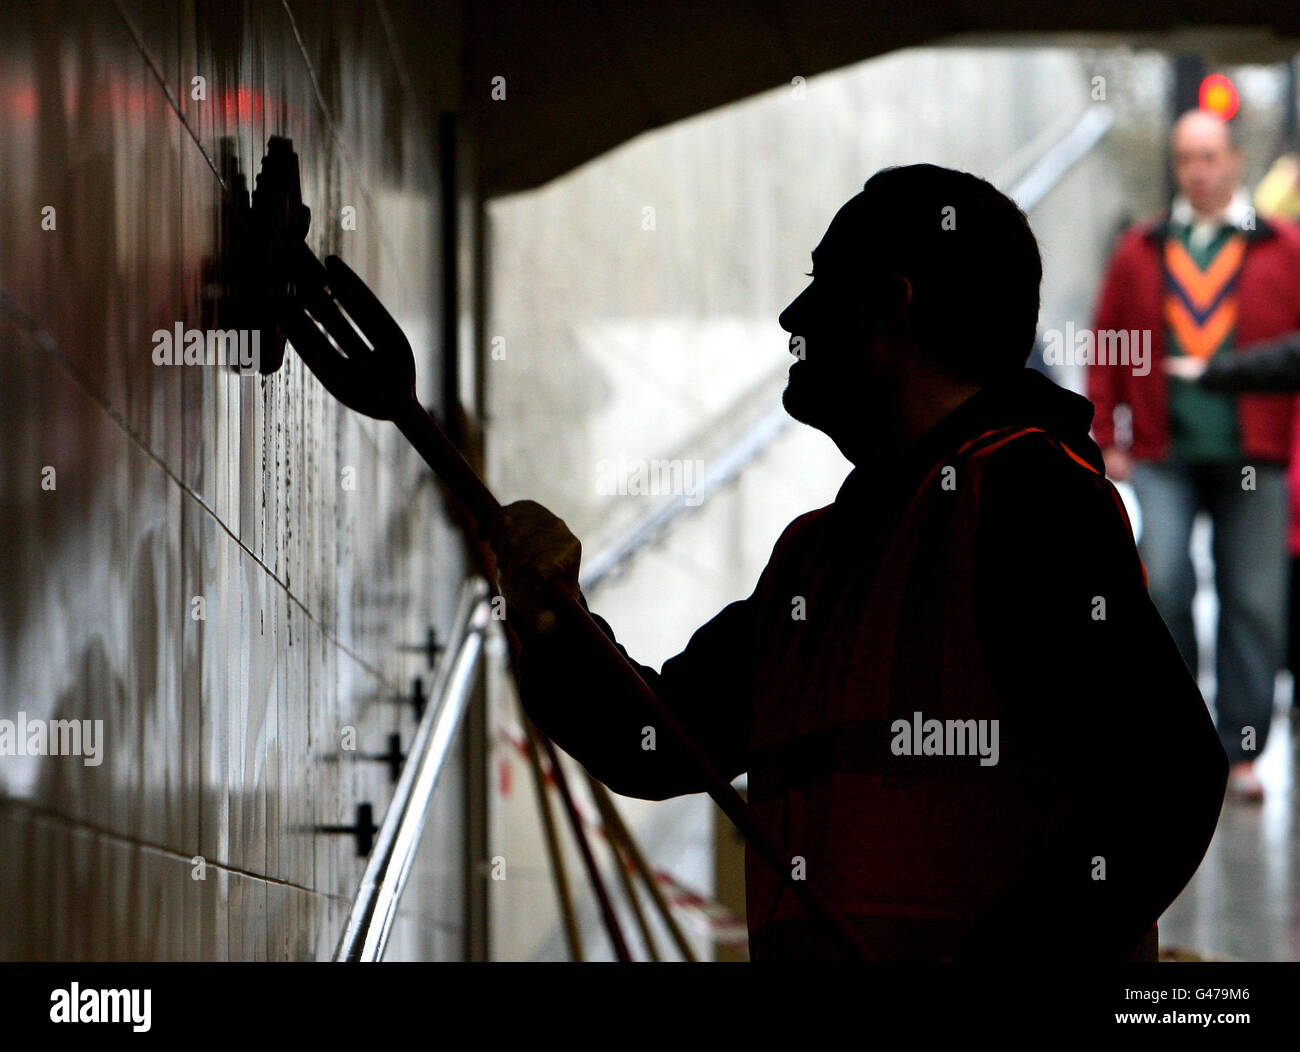 RETRANSMITTED CHANGING CAPTION IN LIGHT OF NEW INFORMATION A convicted offender cleans the wall in the Hyde Park subway, in central London, ahead of the Royal Wedding, as part of a Community Payback scheme managed by Westminster Council and London Probation Trust. Stock Photo